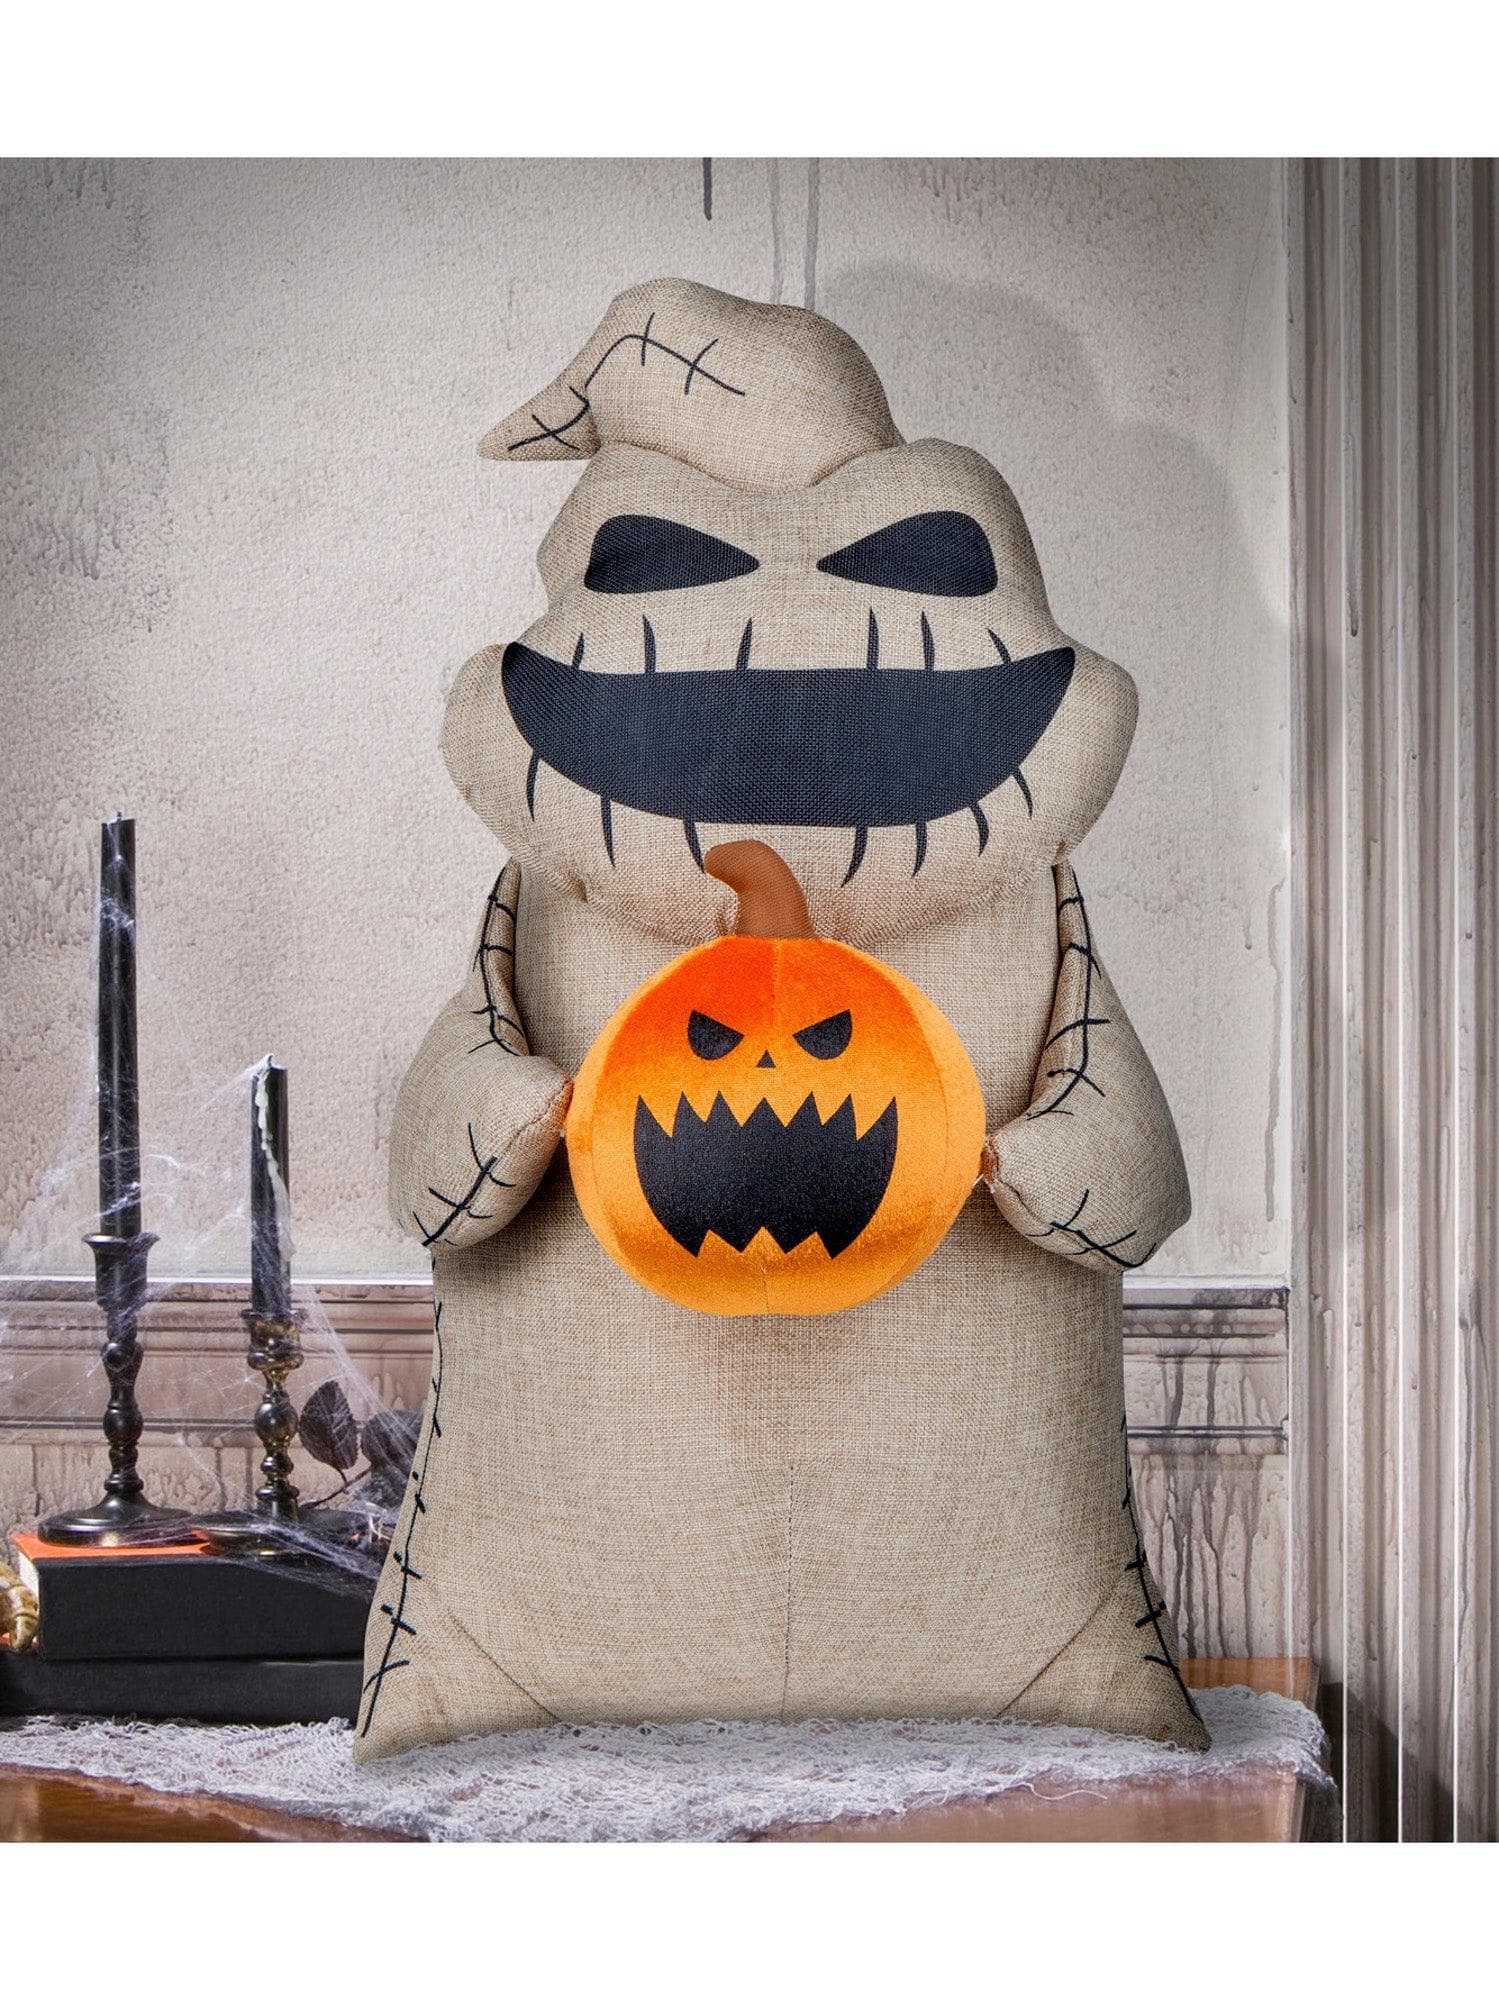 21 Inch The Nightmare Before Christmas Oogie Boogie Plush Front Door Greeter - costumes.com